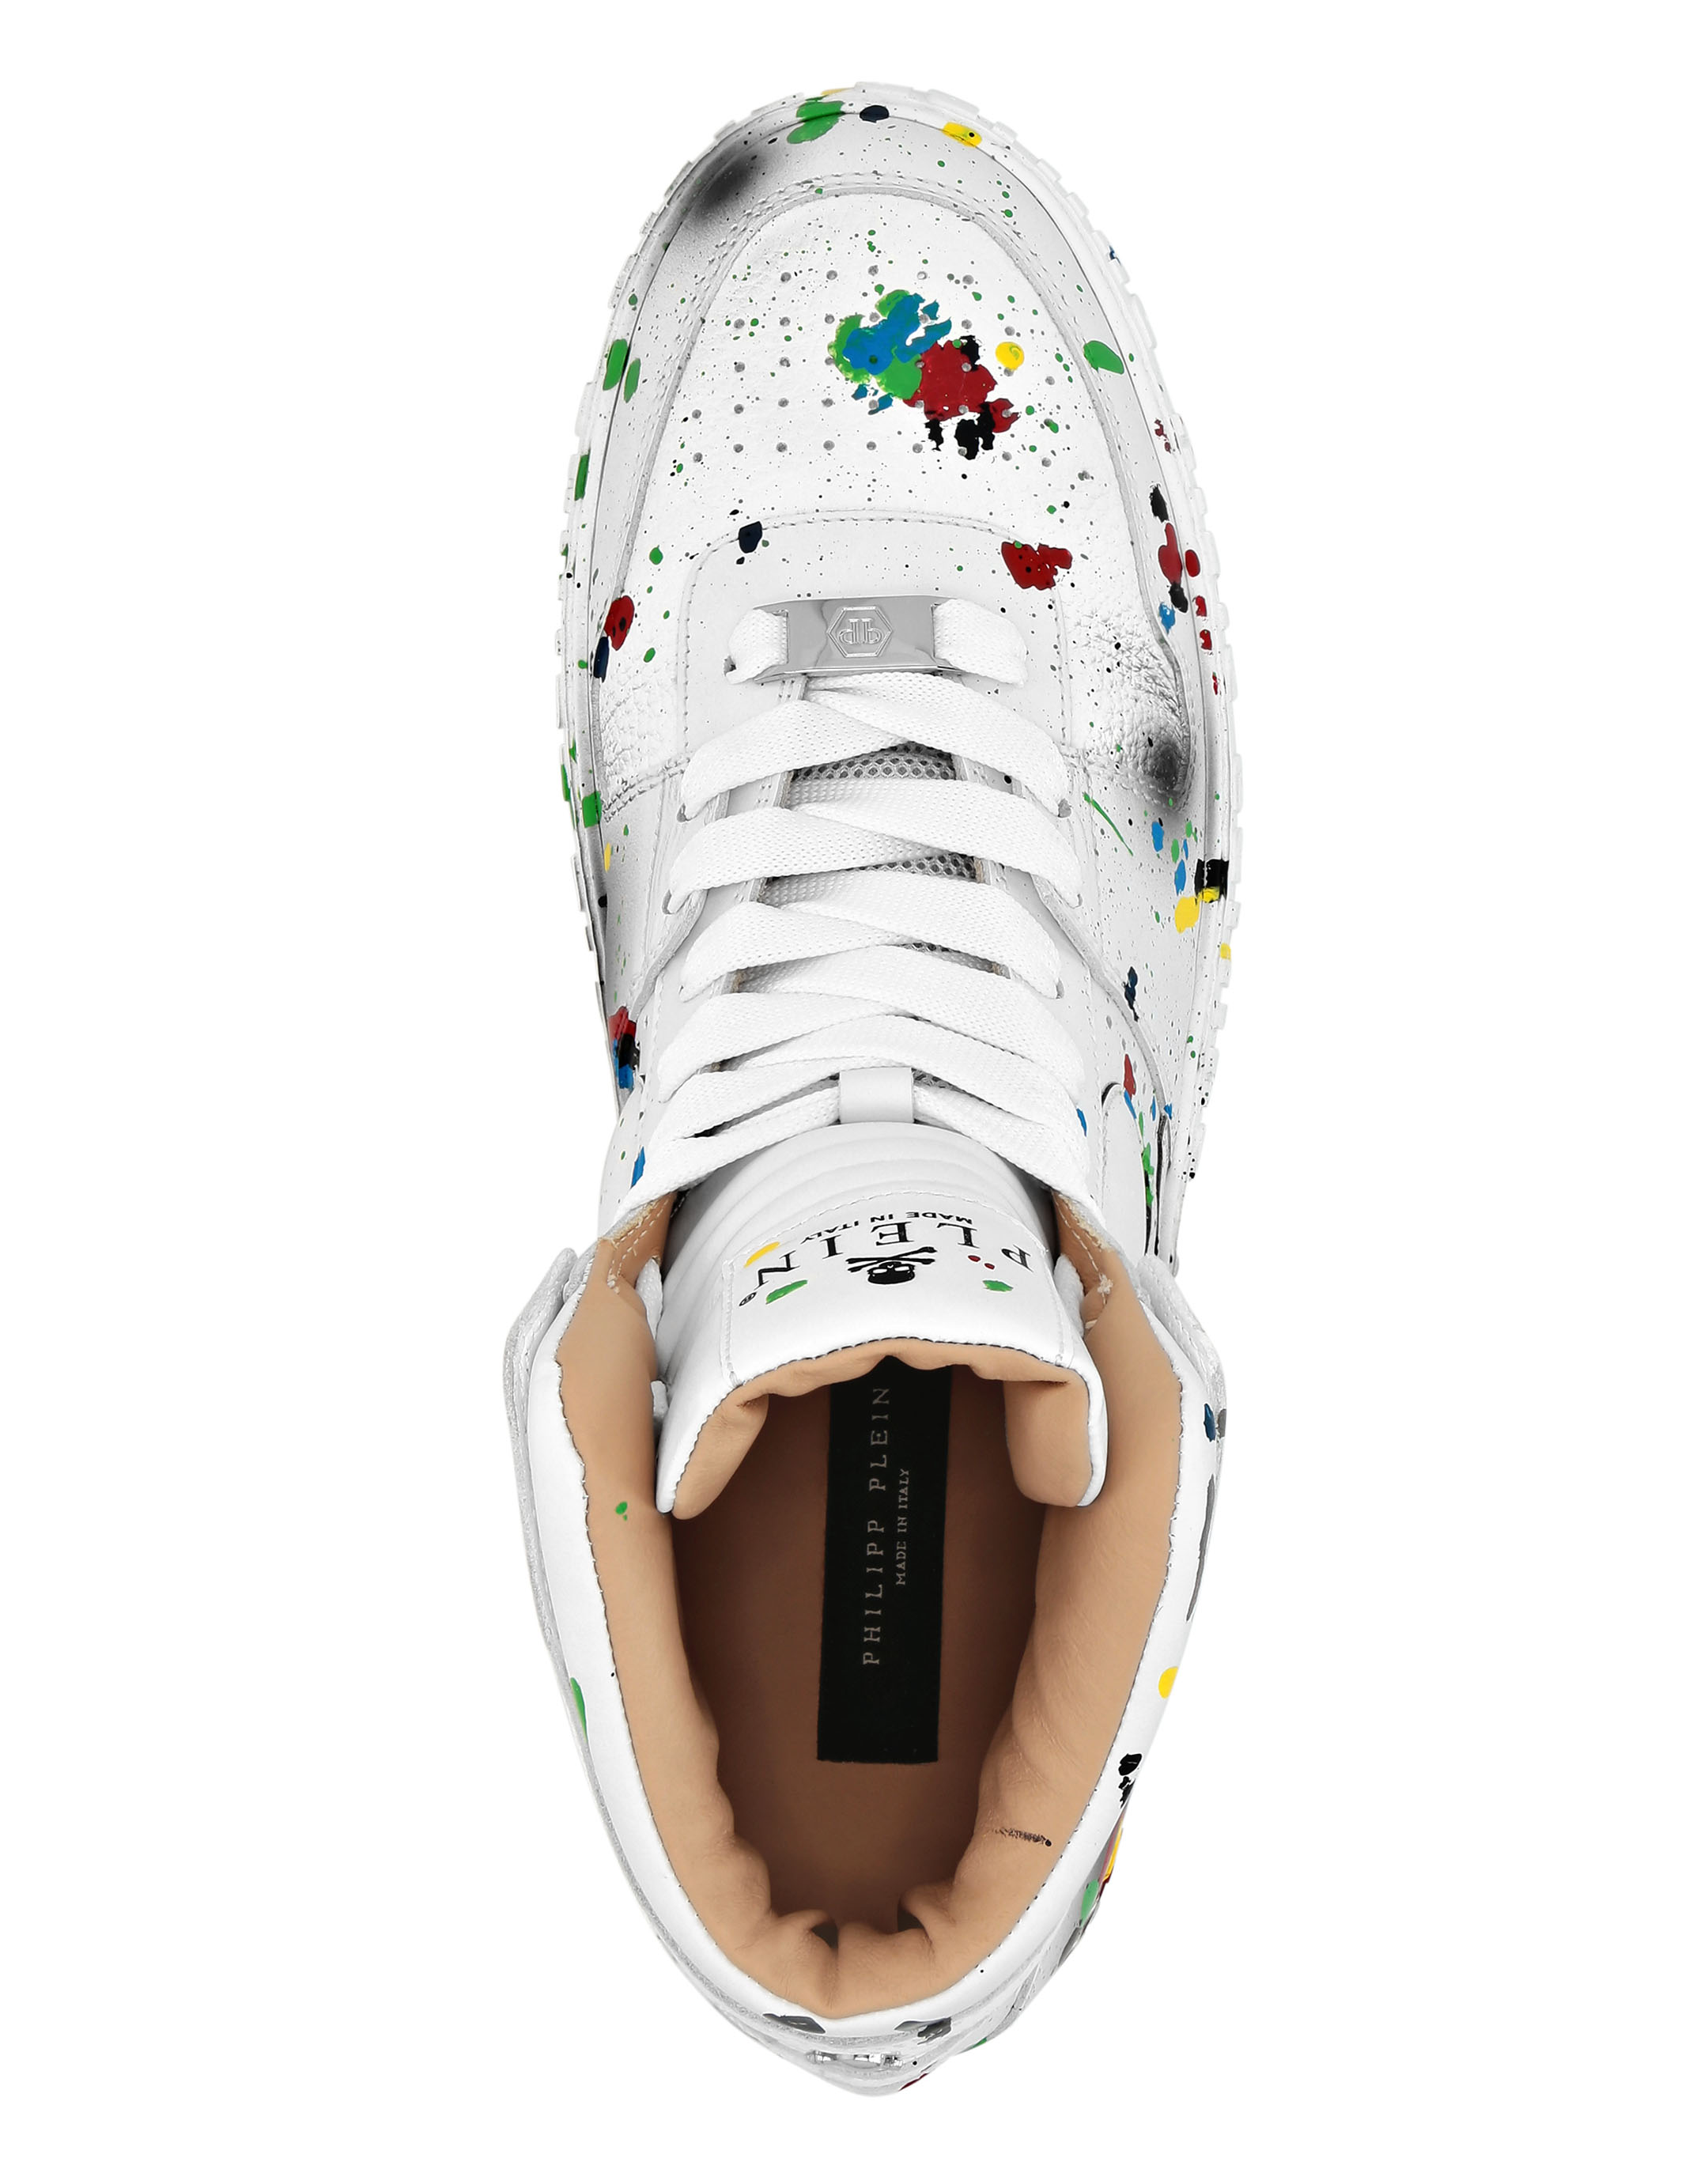 HI-TOP SNEAKERS NOTORIOUS PAINTED | Philipp Plein Outlet